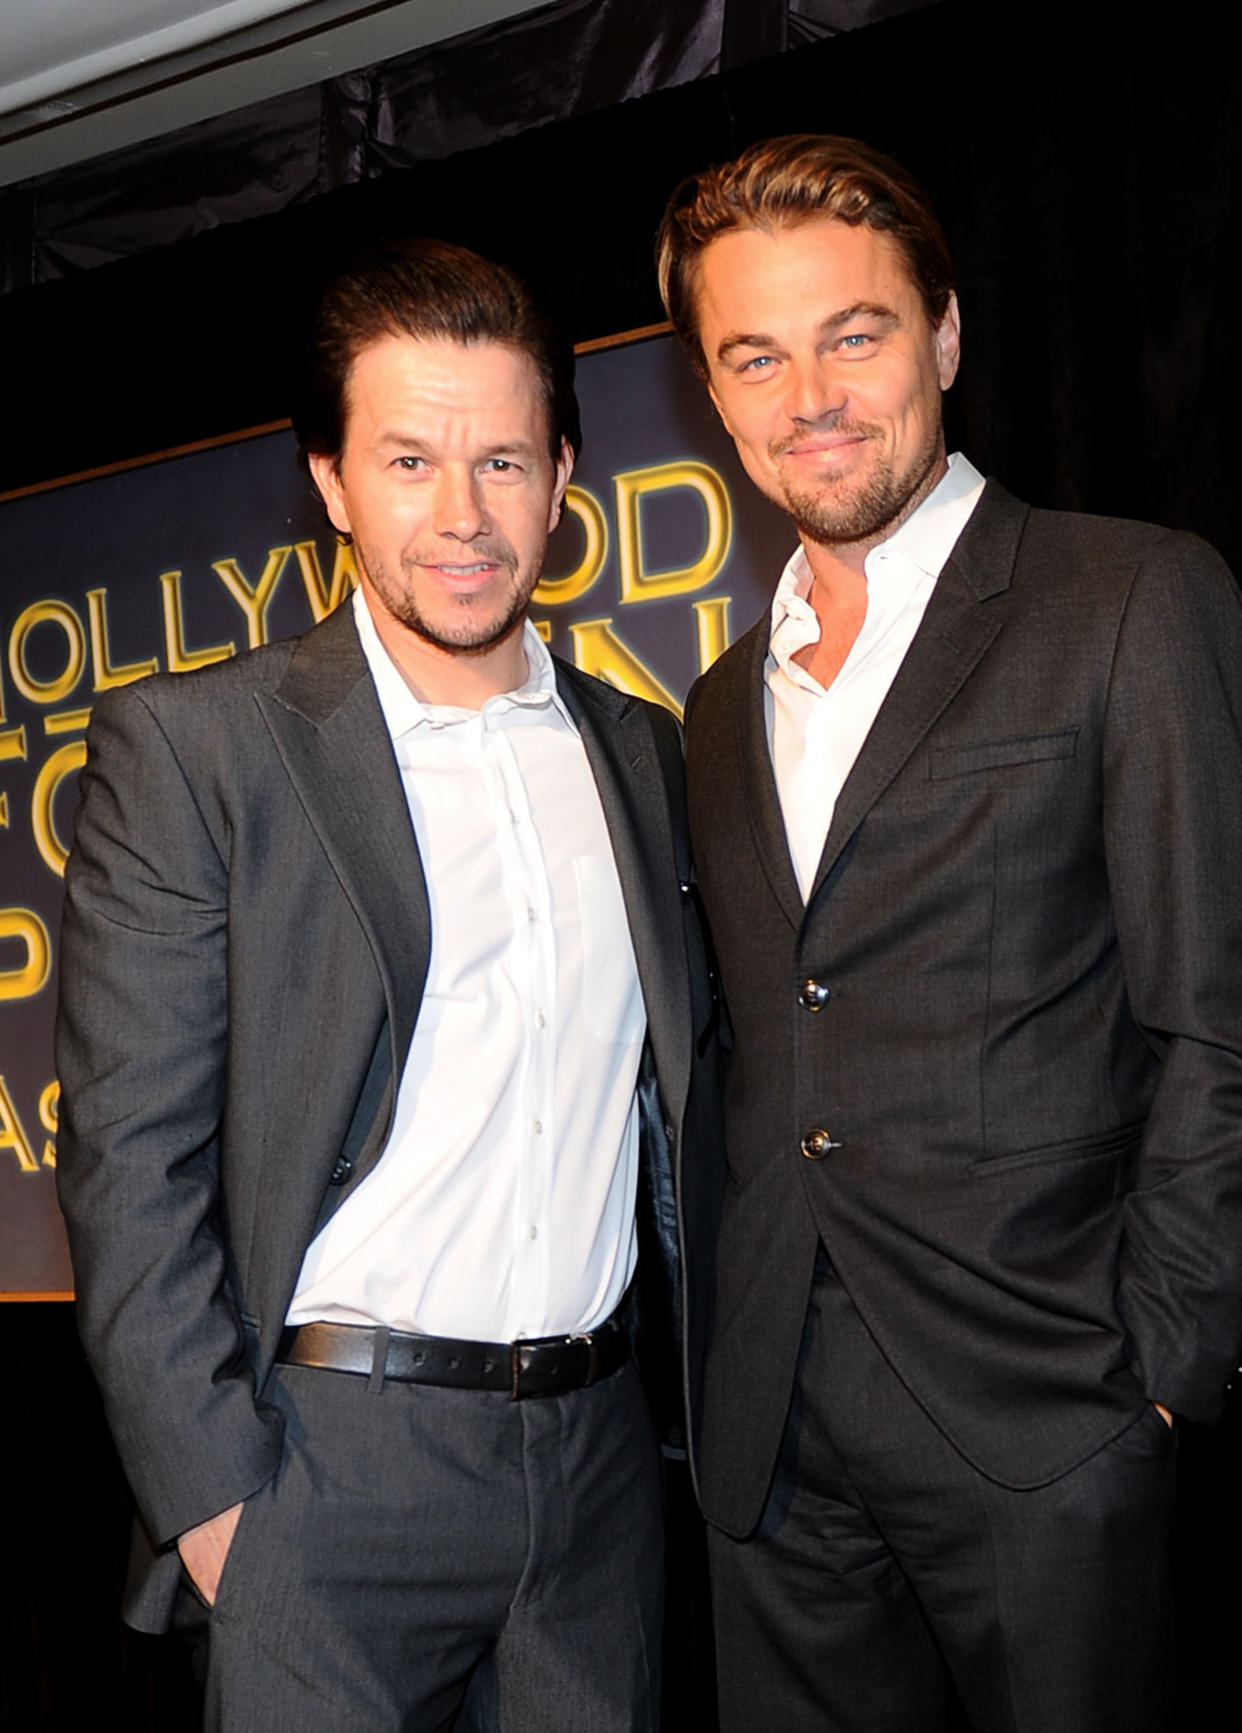 Mark Wahlberg and Leonardo DiCaprio, pictured in 2011, have pushed past their initial bad blood. (Photo: Frazer Harrison/Getty Images)